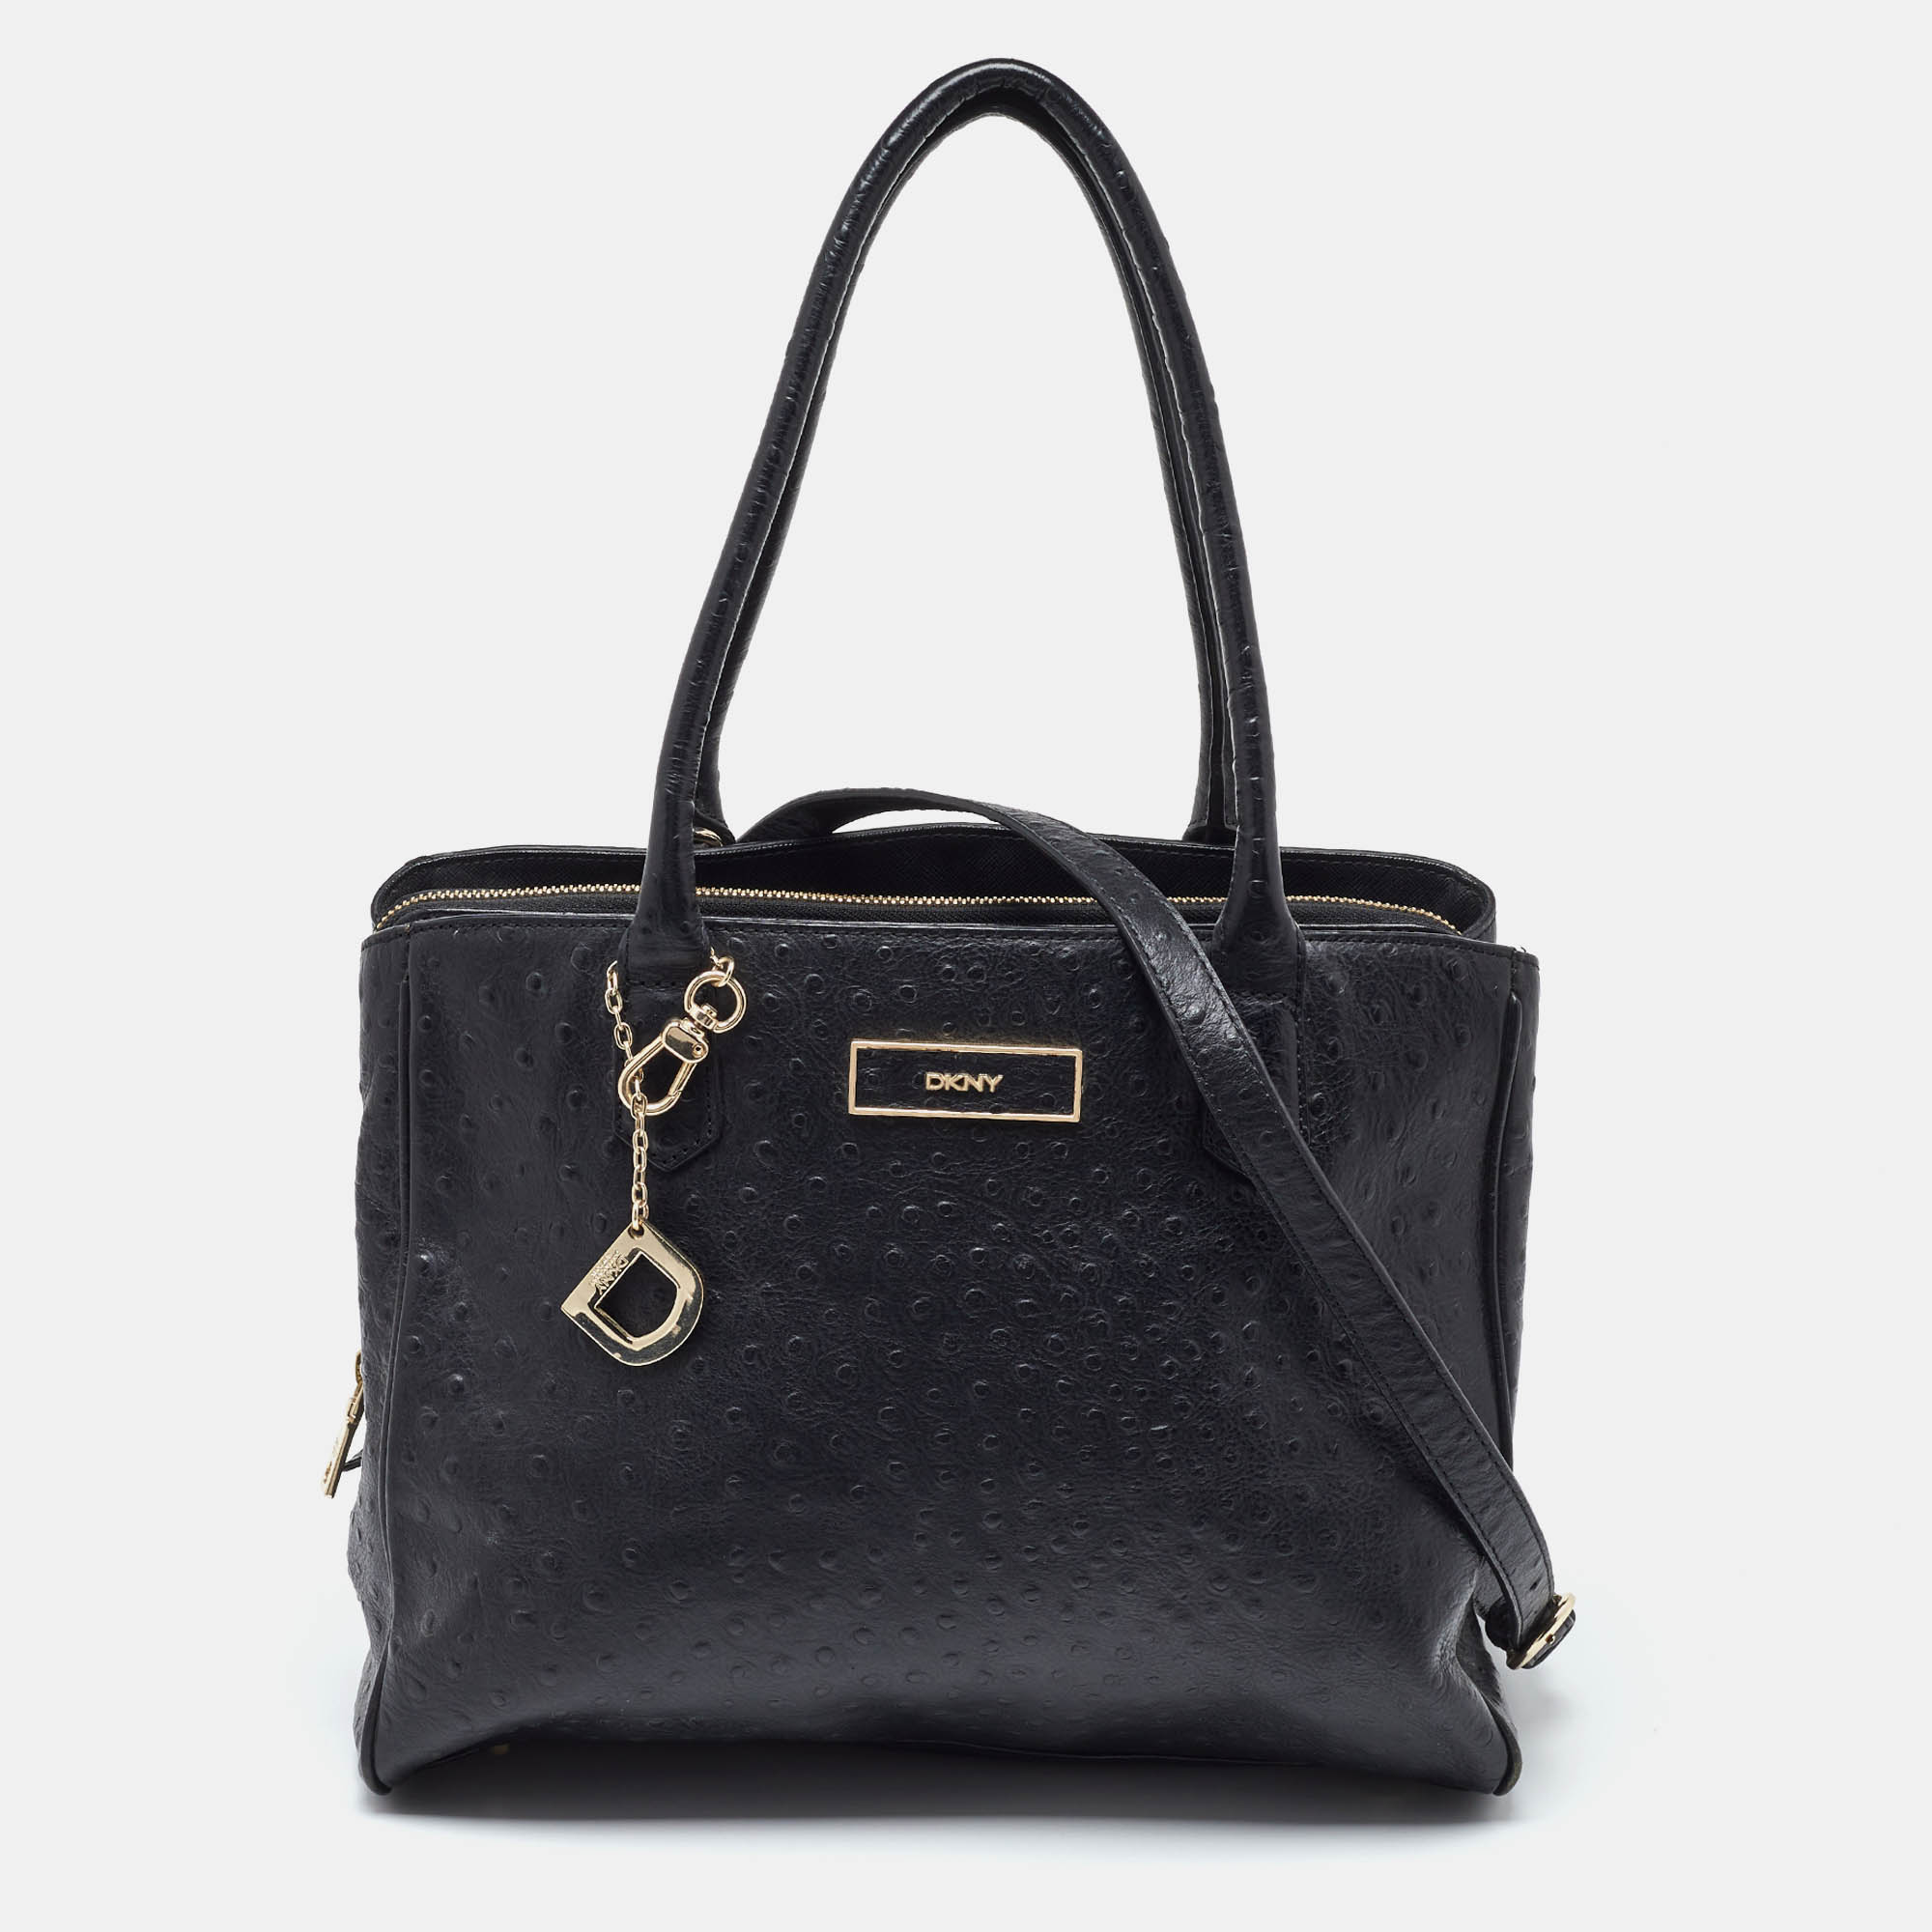 Dkny black ostrich embossed leather tote